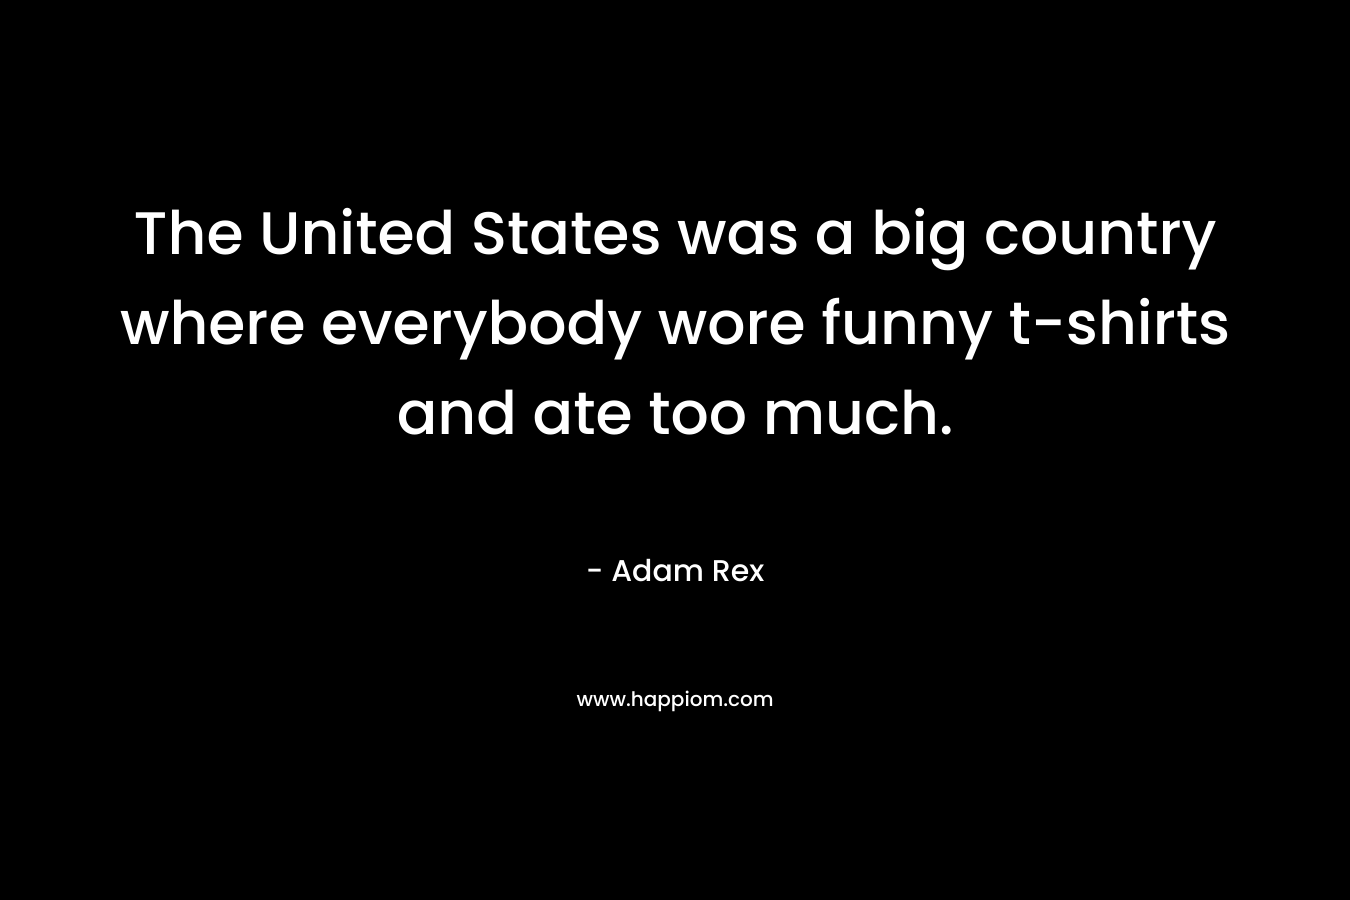 The United States was a big country where everybody wore funny t-shirts and ate too much.